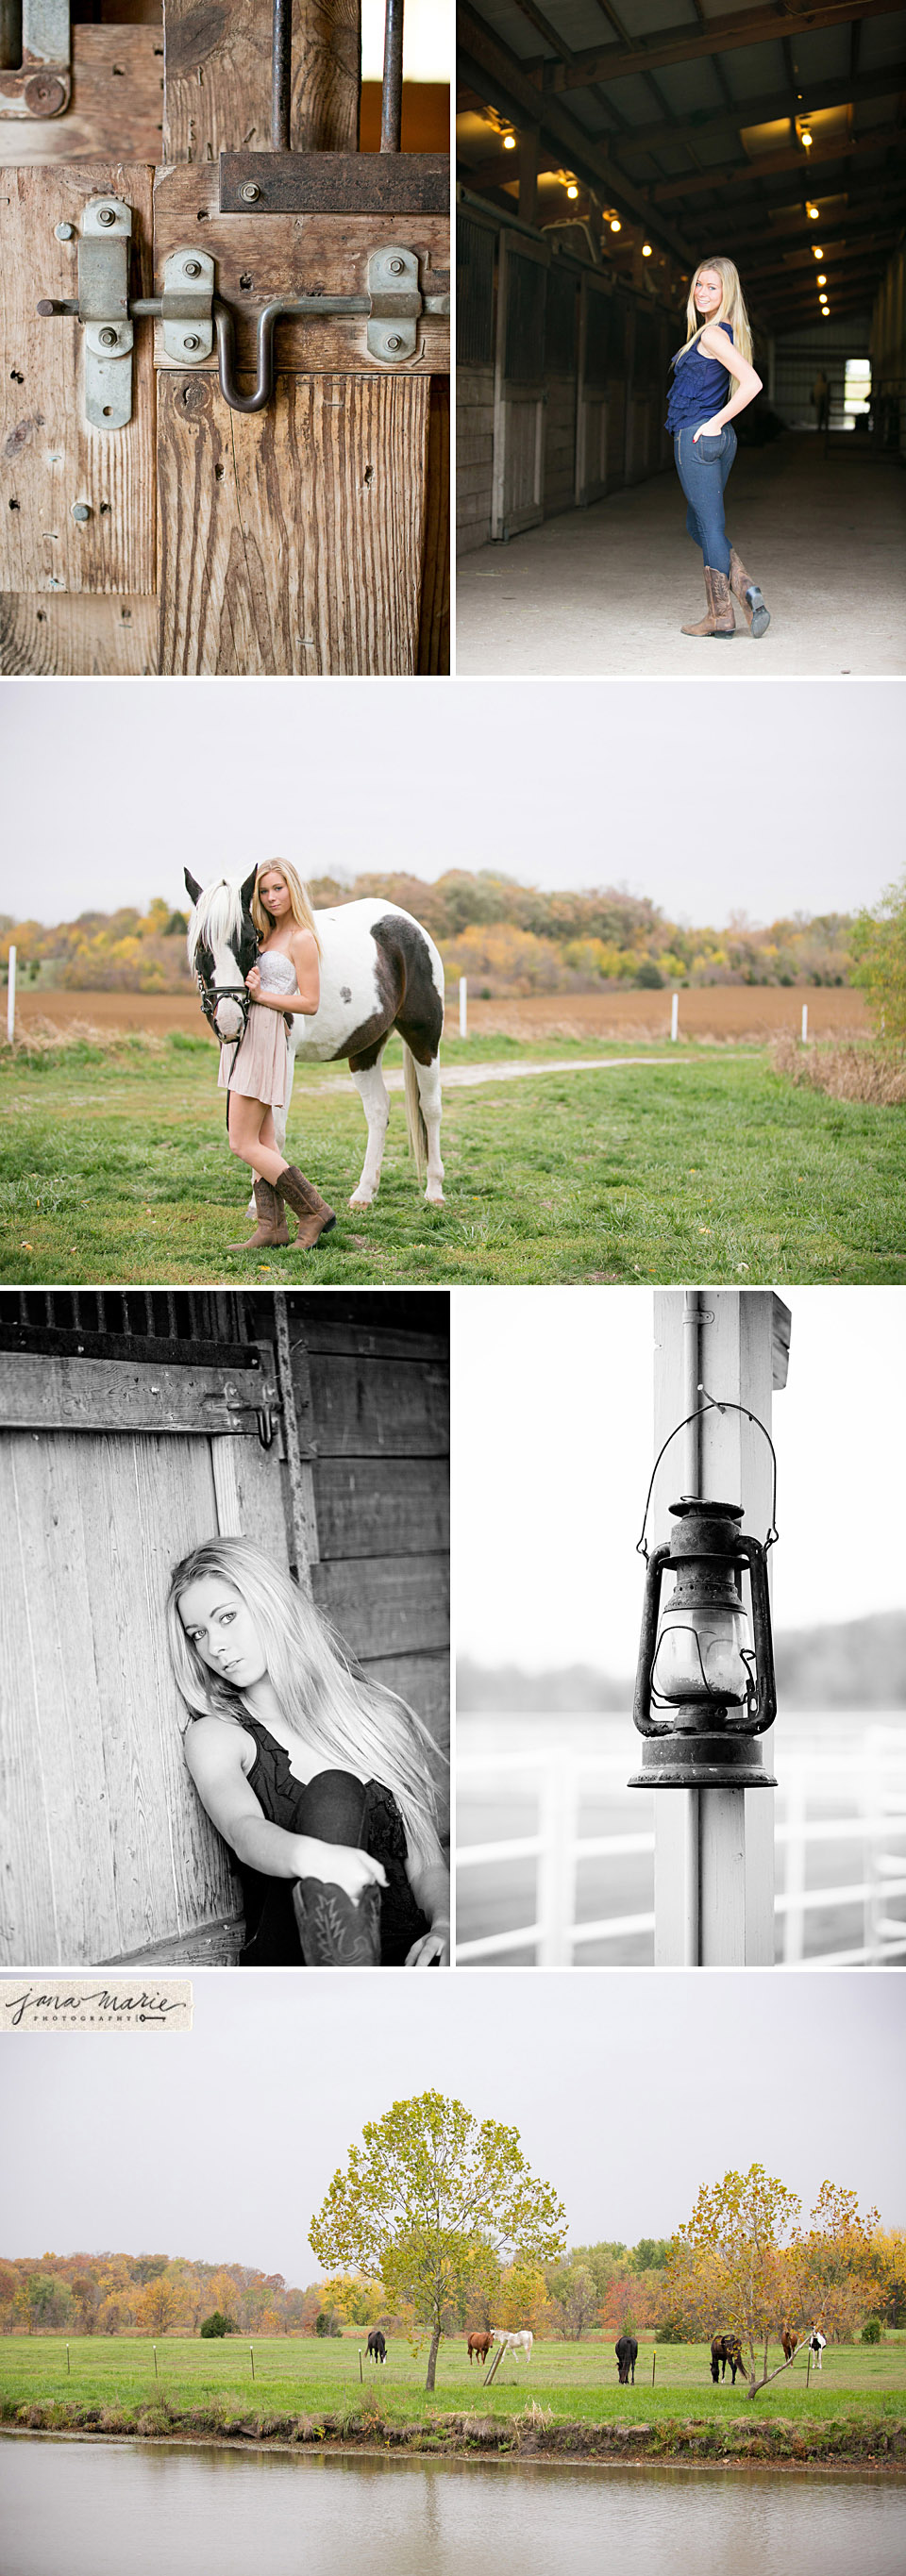 Whispering Willow, Independence horse stables, Senior portraits, Jana Marie Photography, Barns